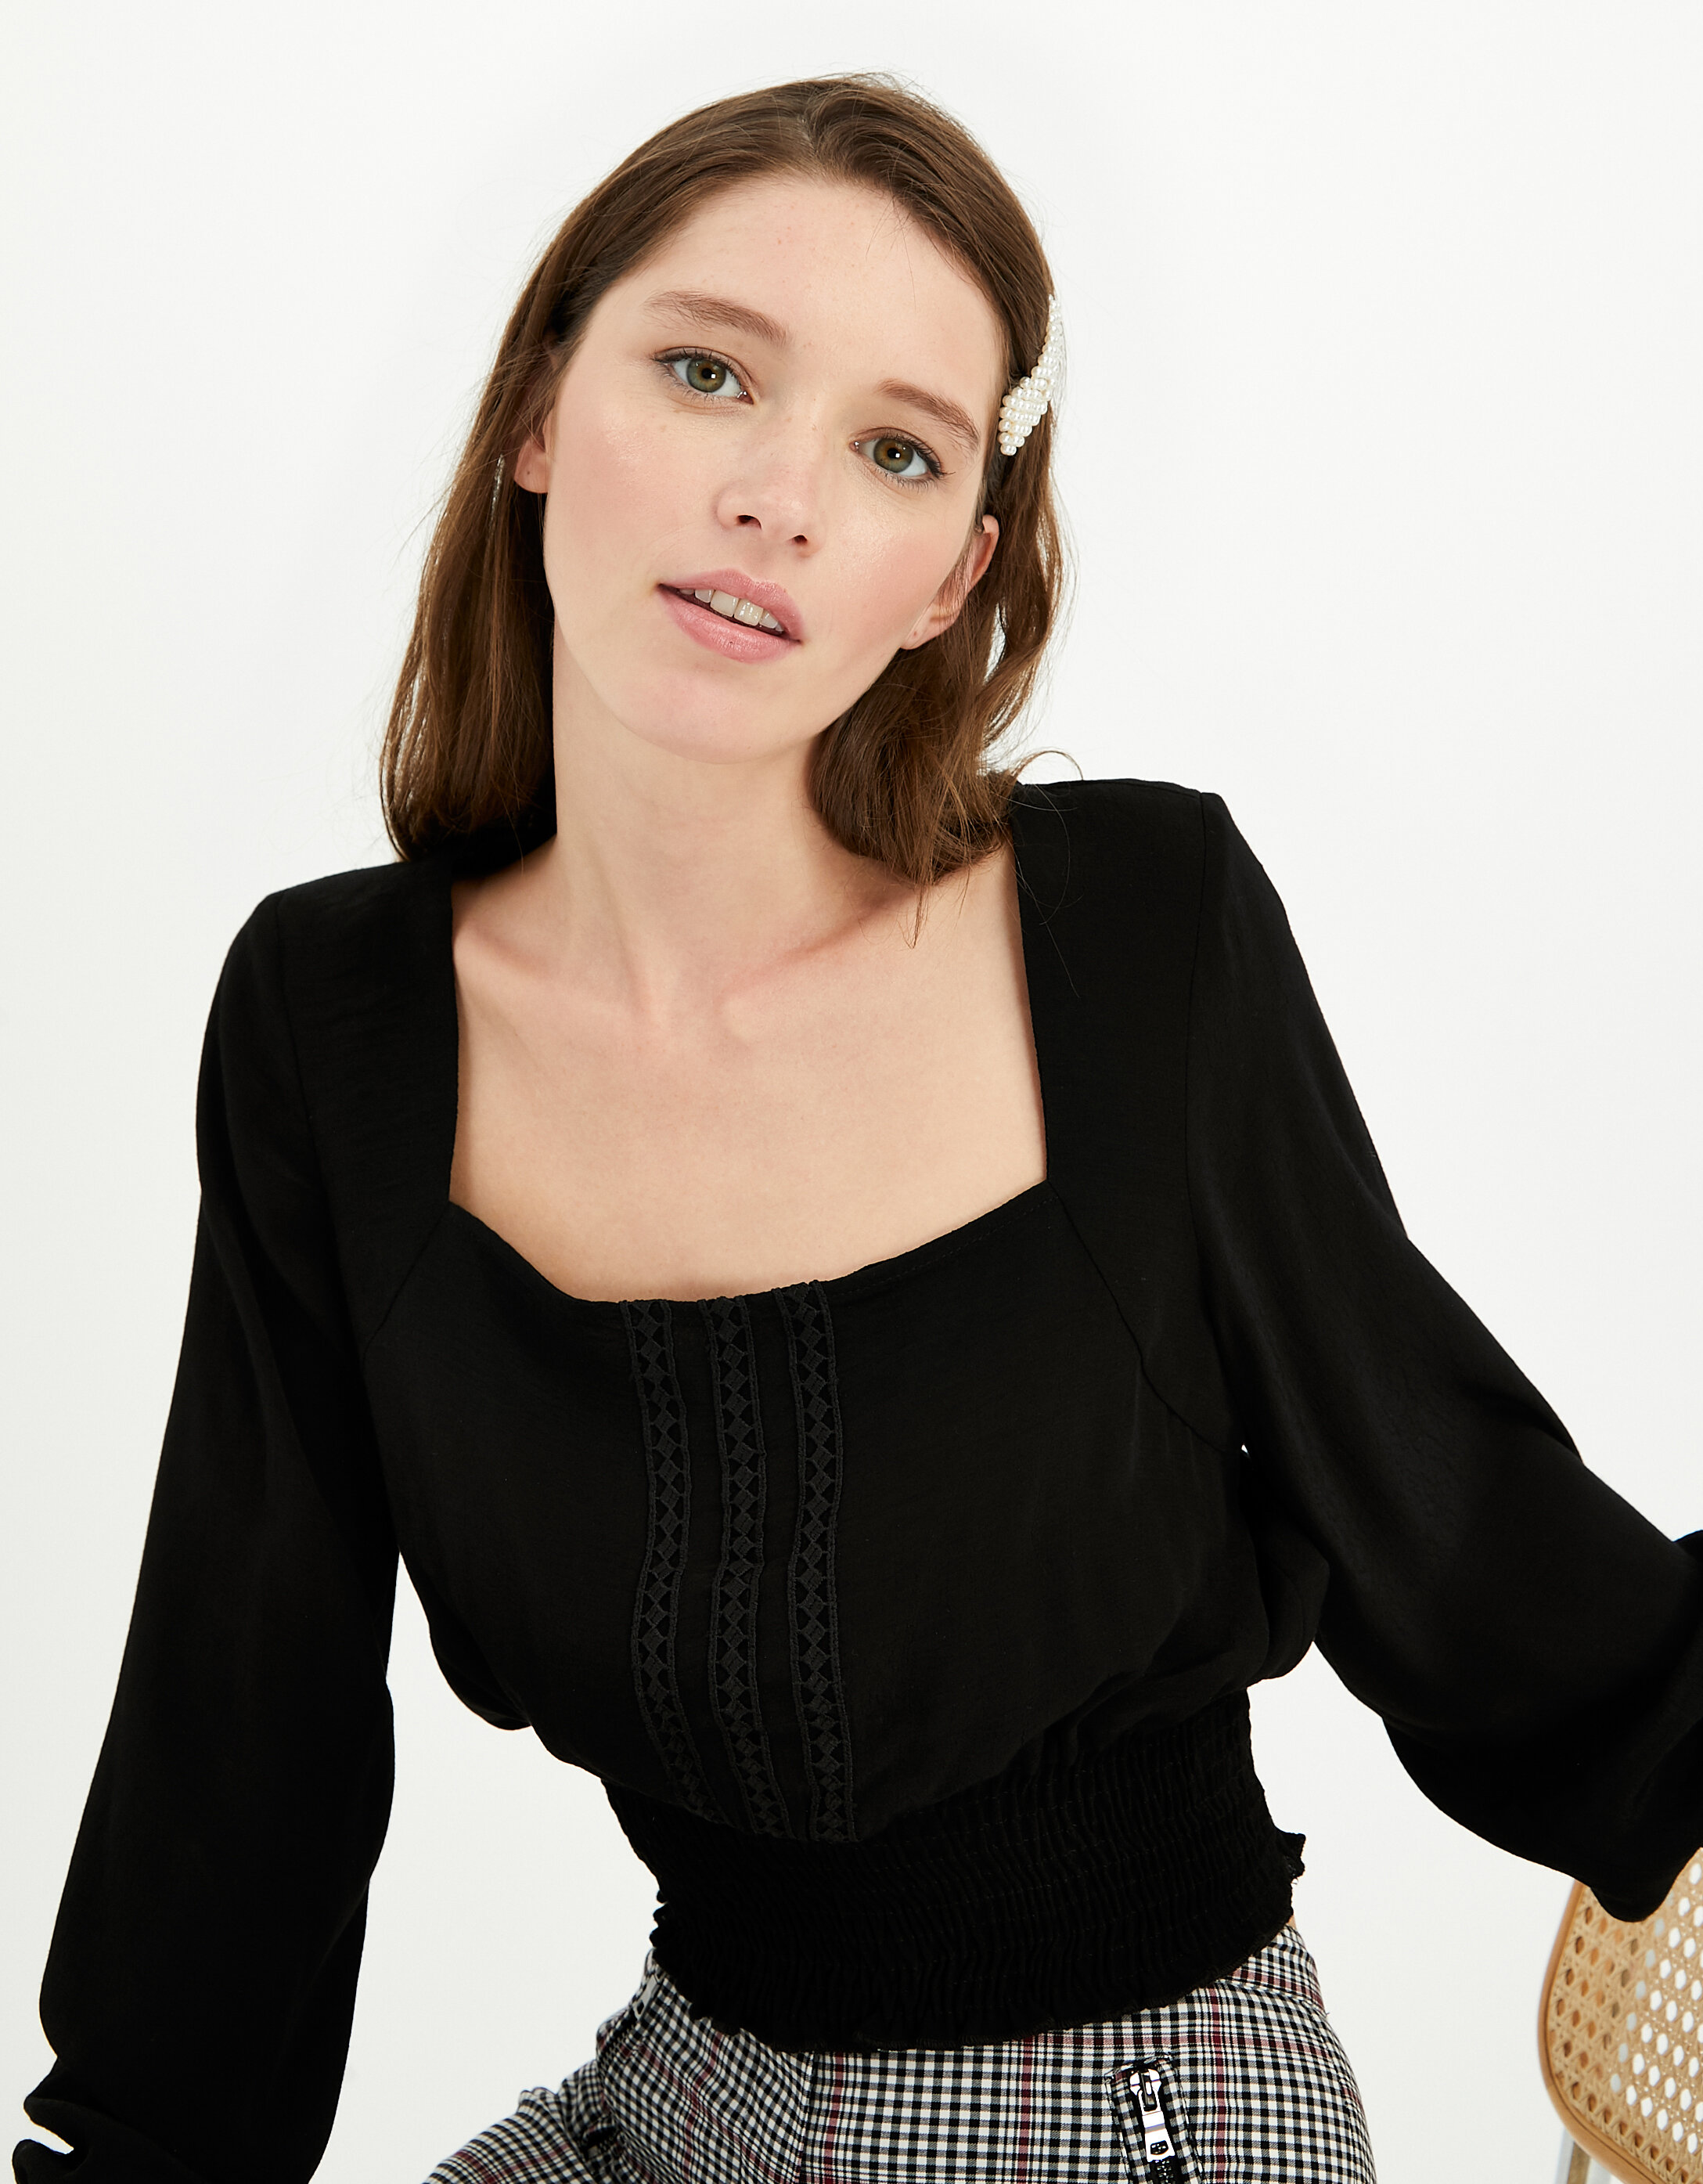  Woven blouse with squared neckline, crochet trim details and open back 